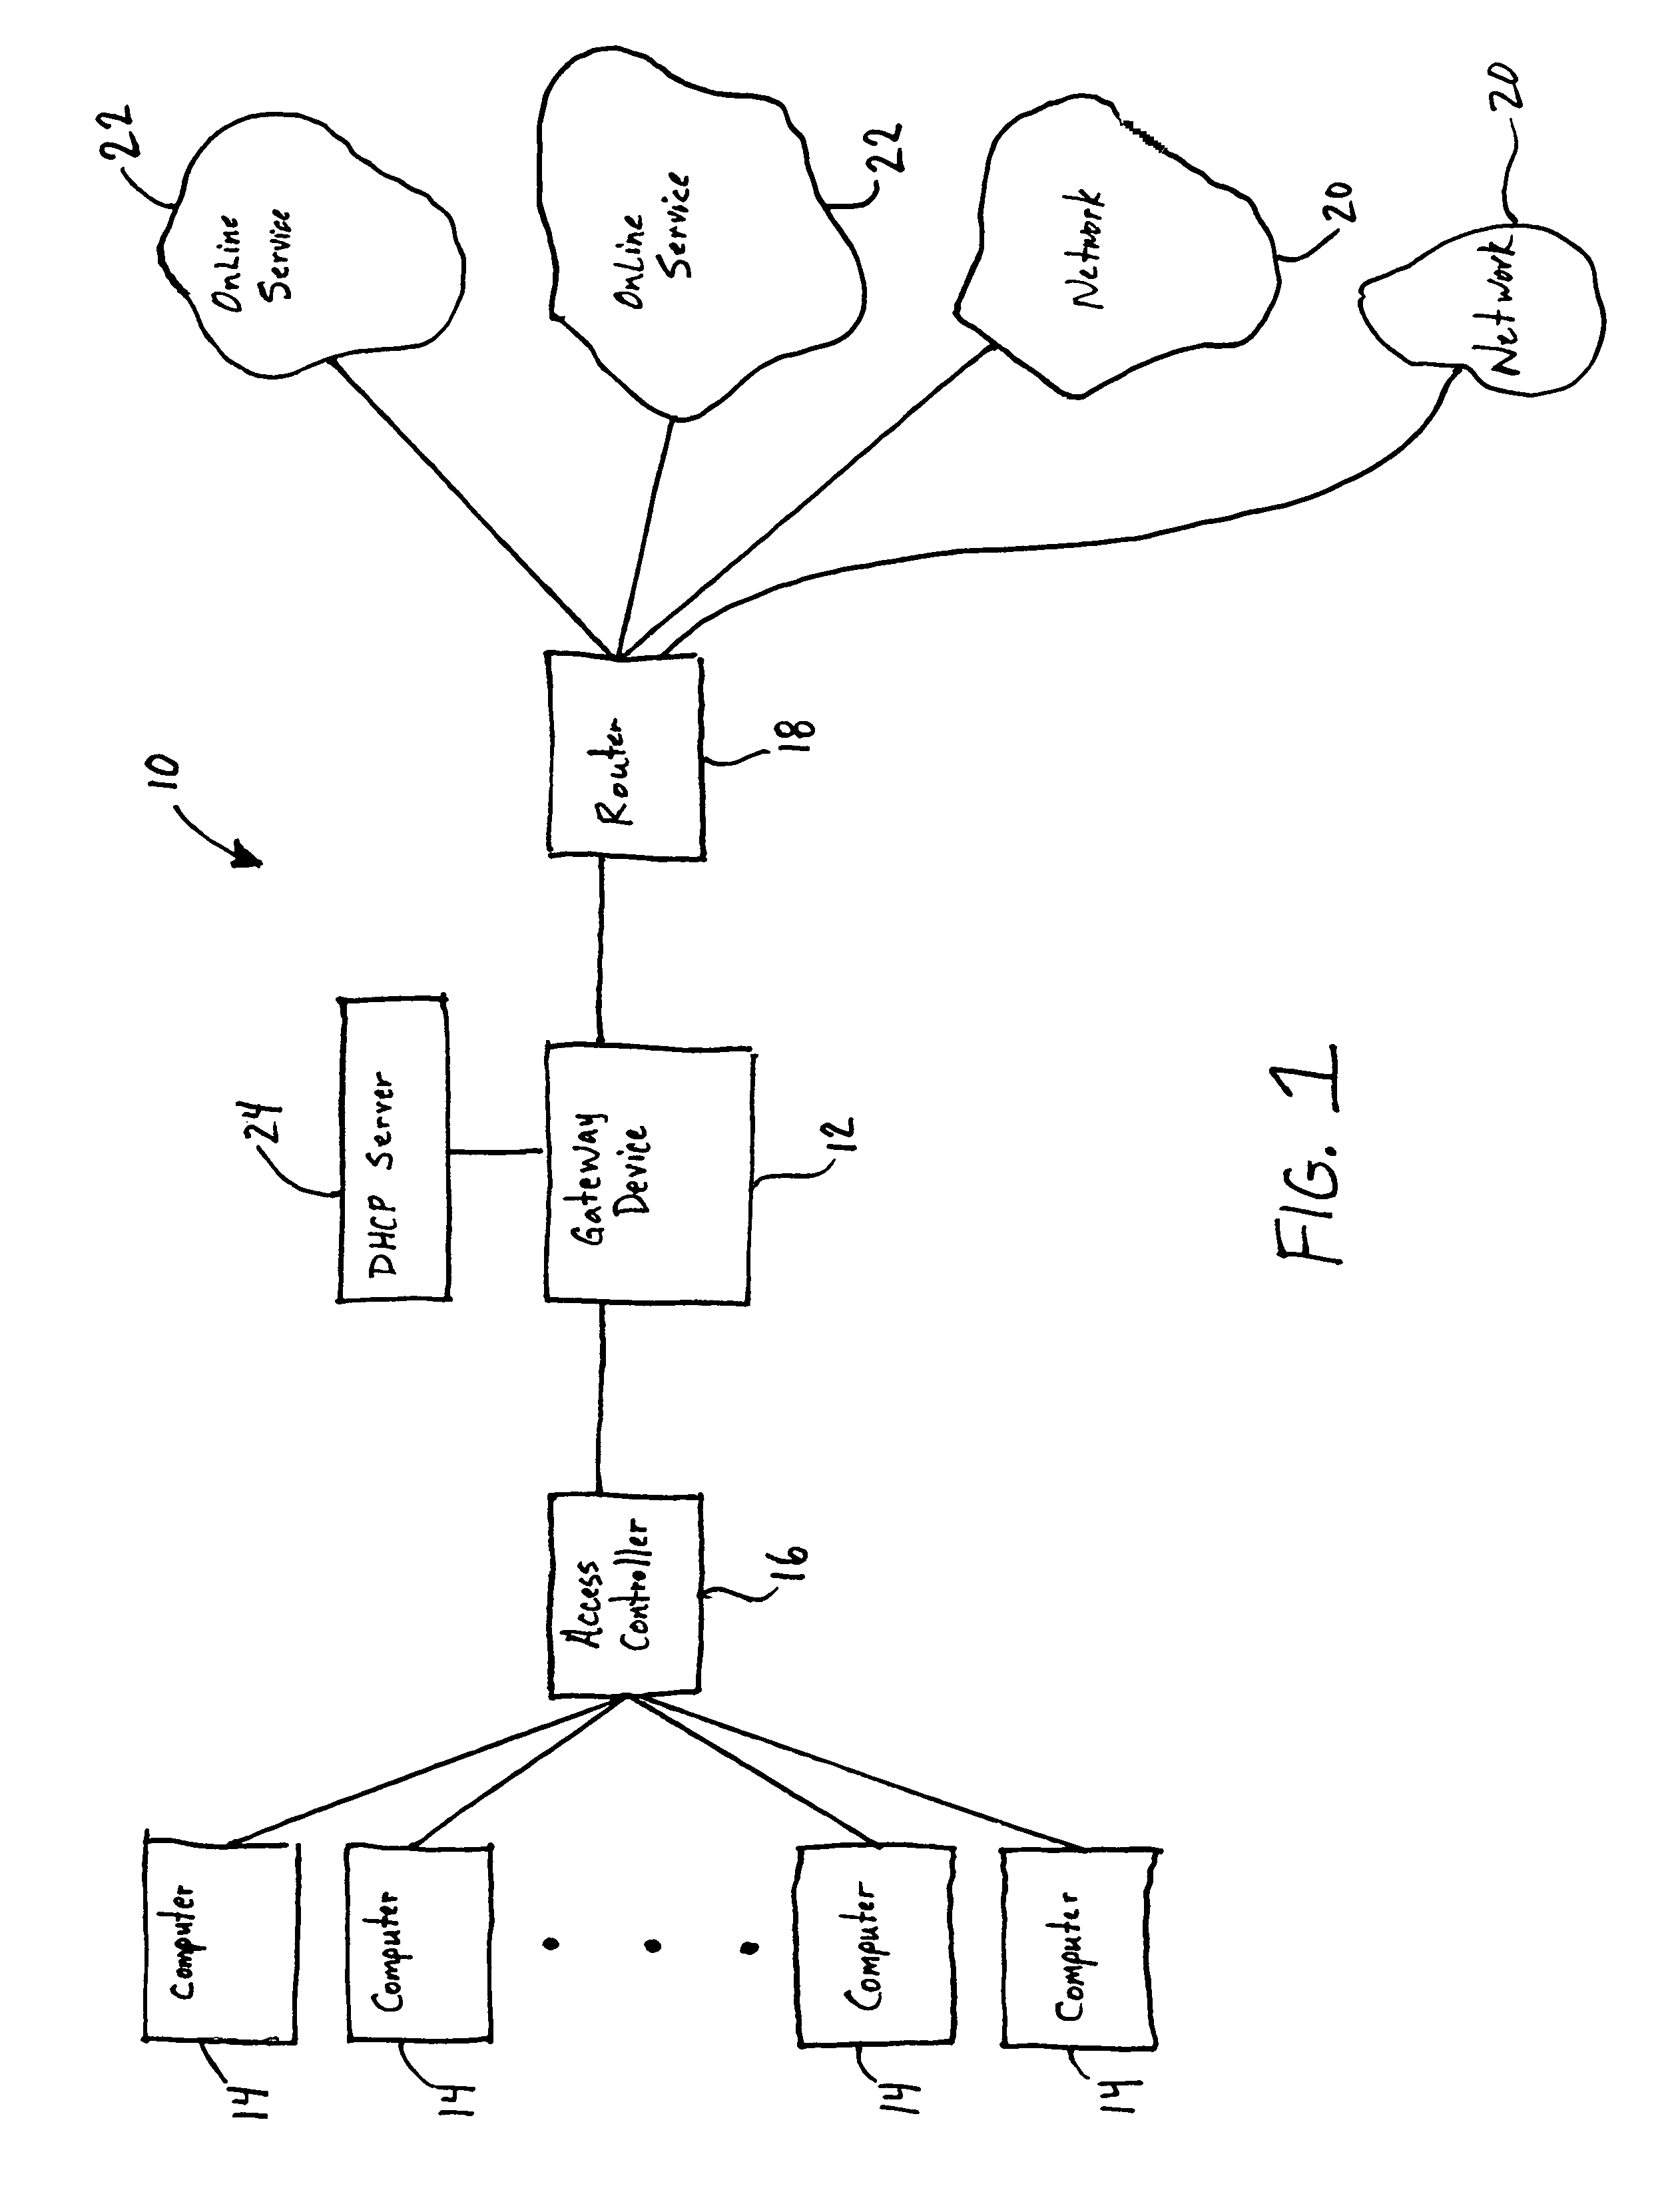 Systems and methods for authorizing, authenticating and accounting users having transparent computer access to a network using a gateway device